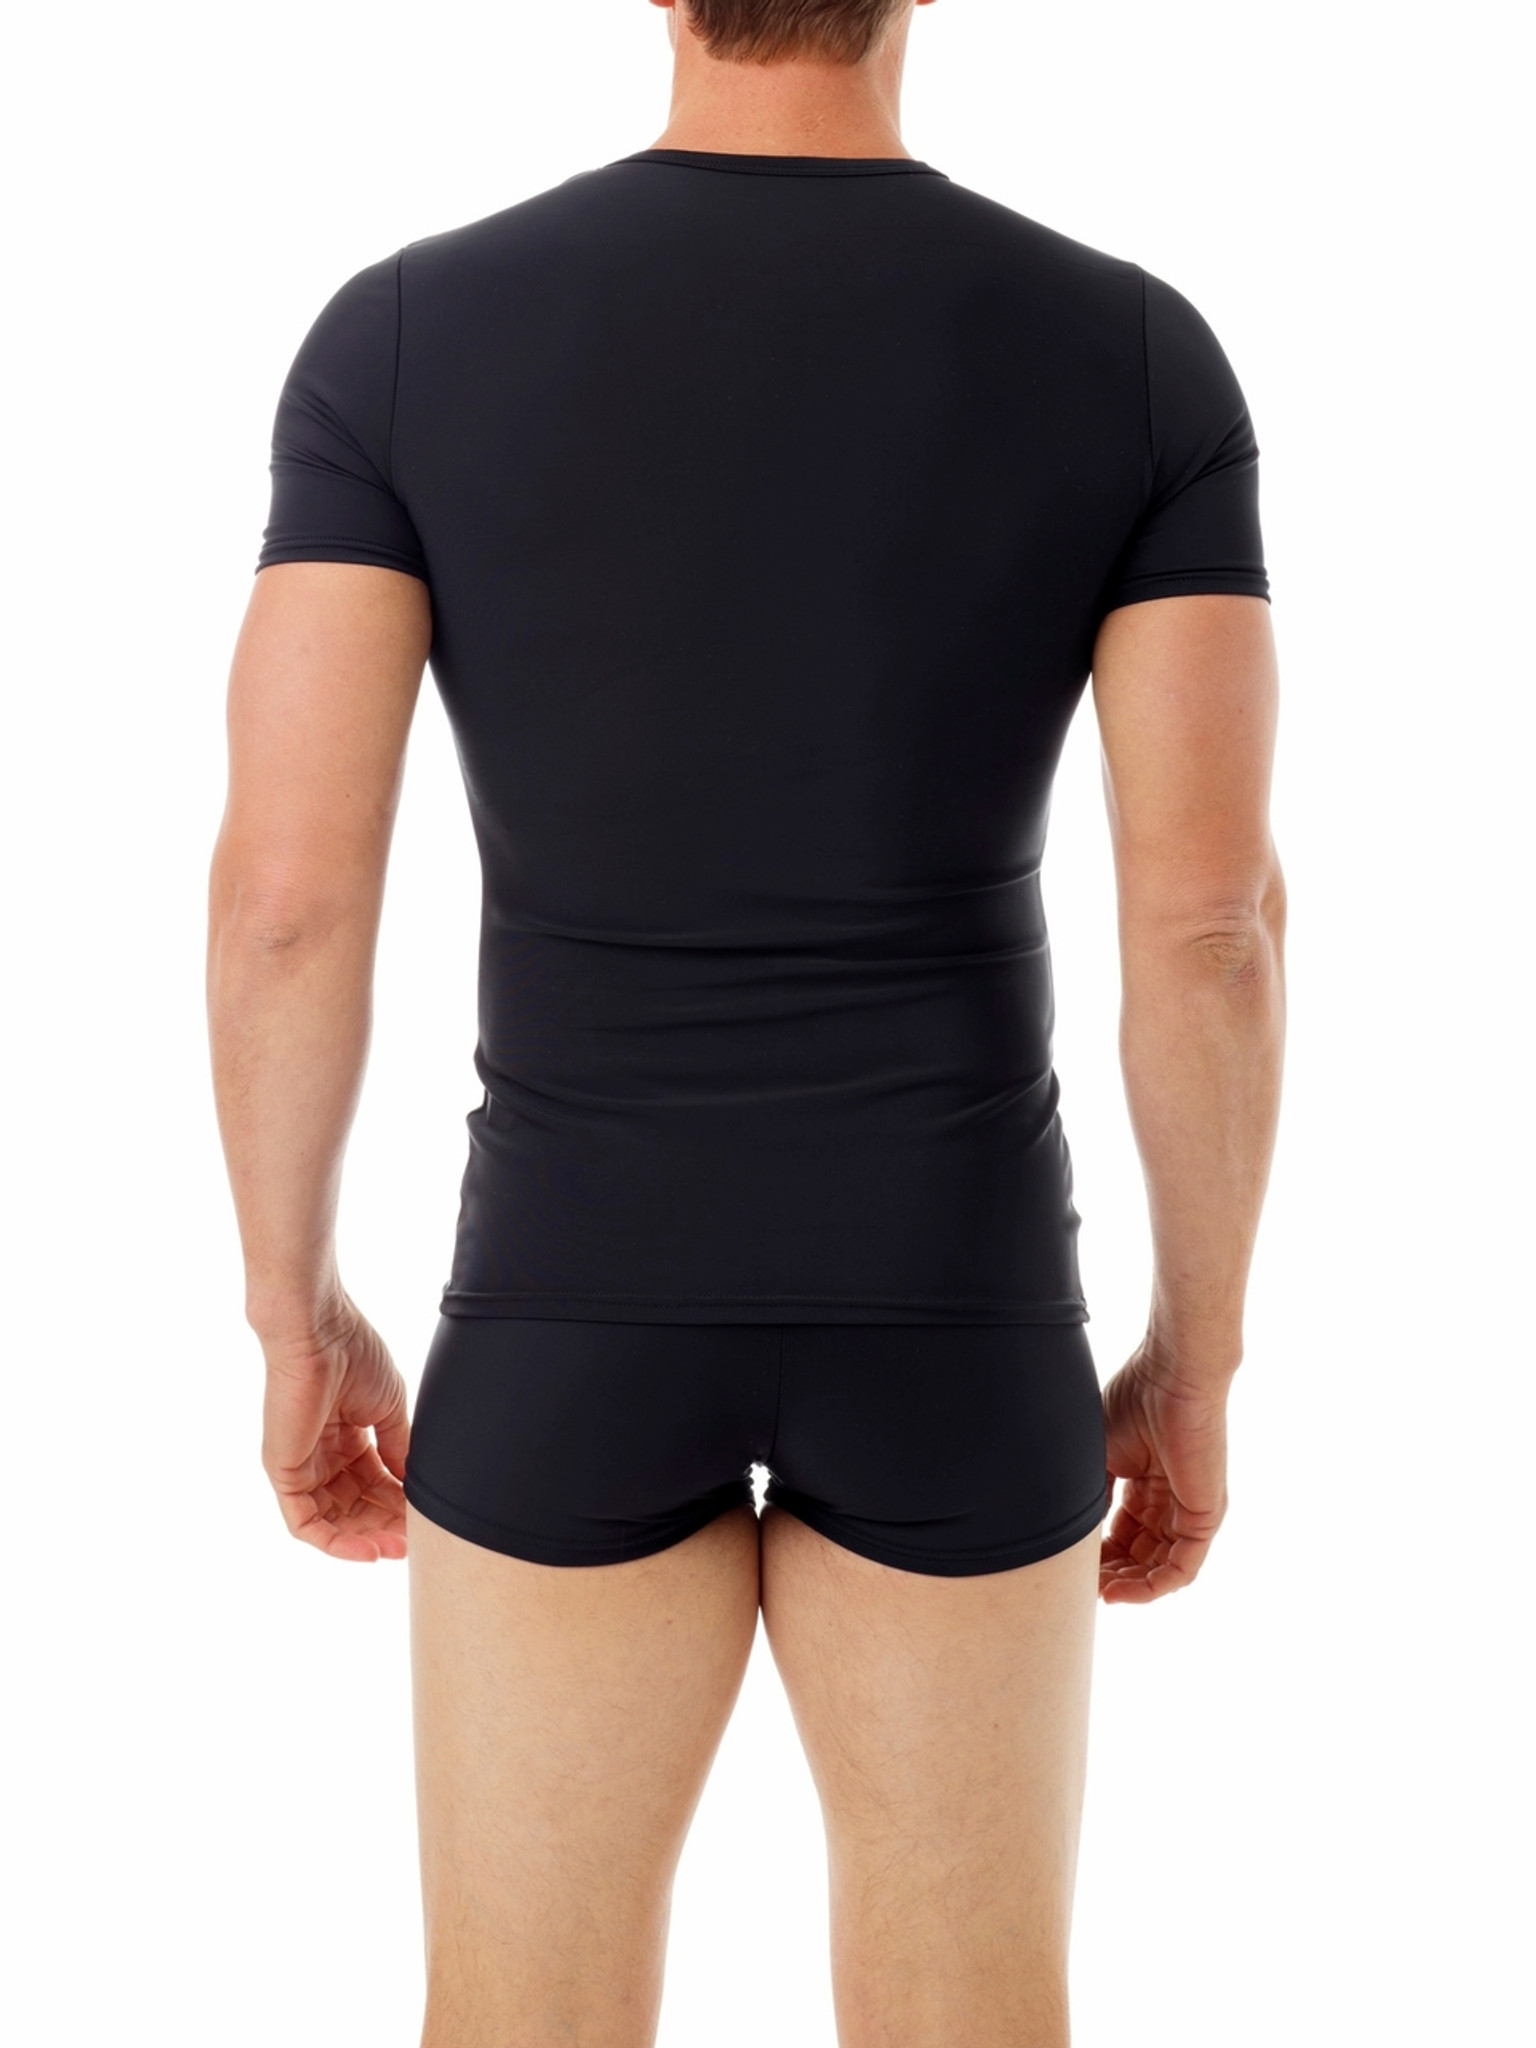 Gynecomastia Compression Shirt Muscle Style Top Quality Made in the USA since 99 